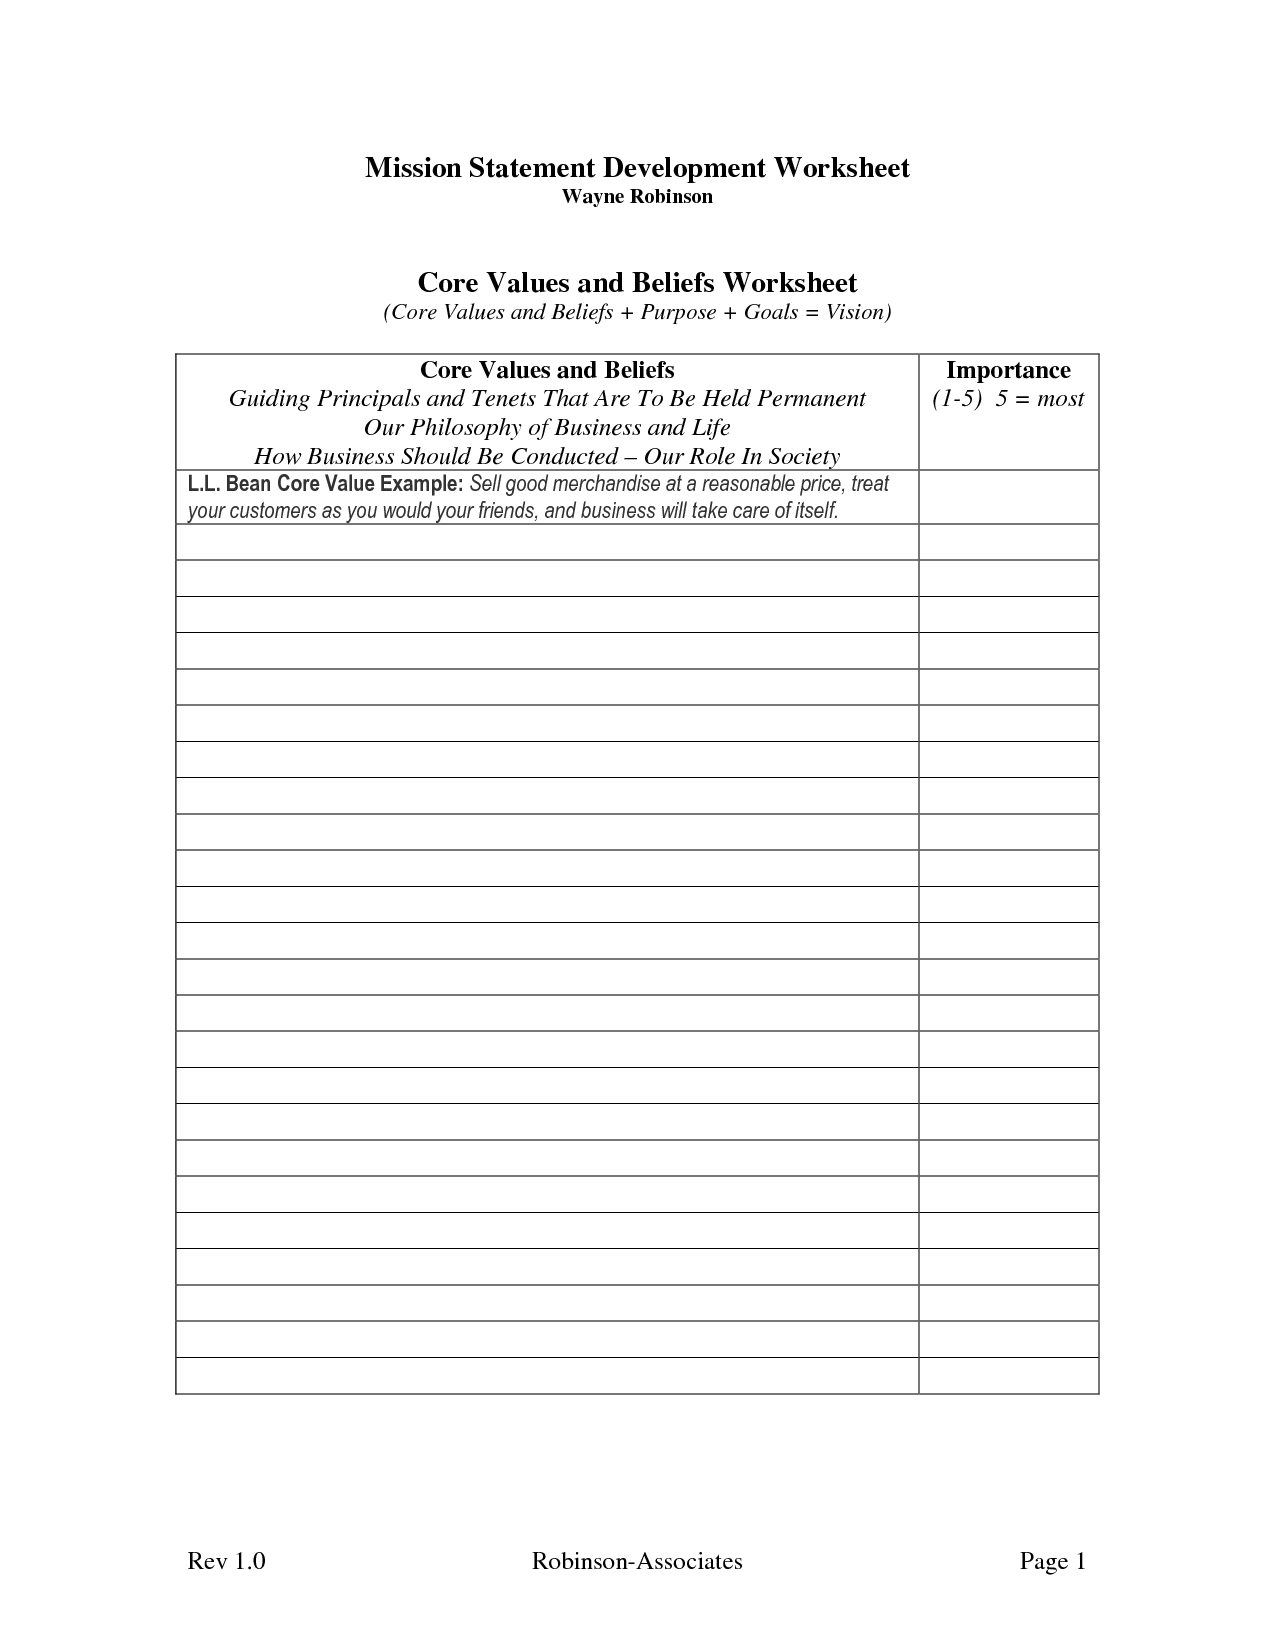 Core Values and Beliefs Worksheet